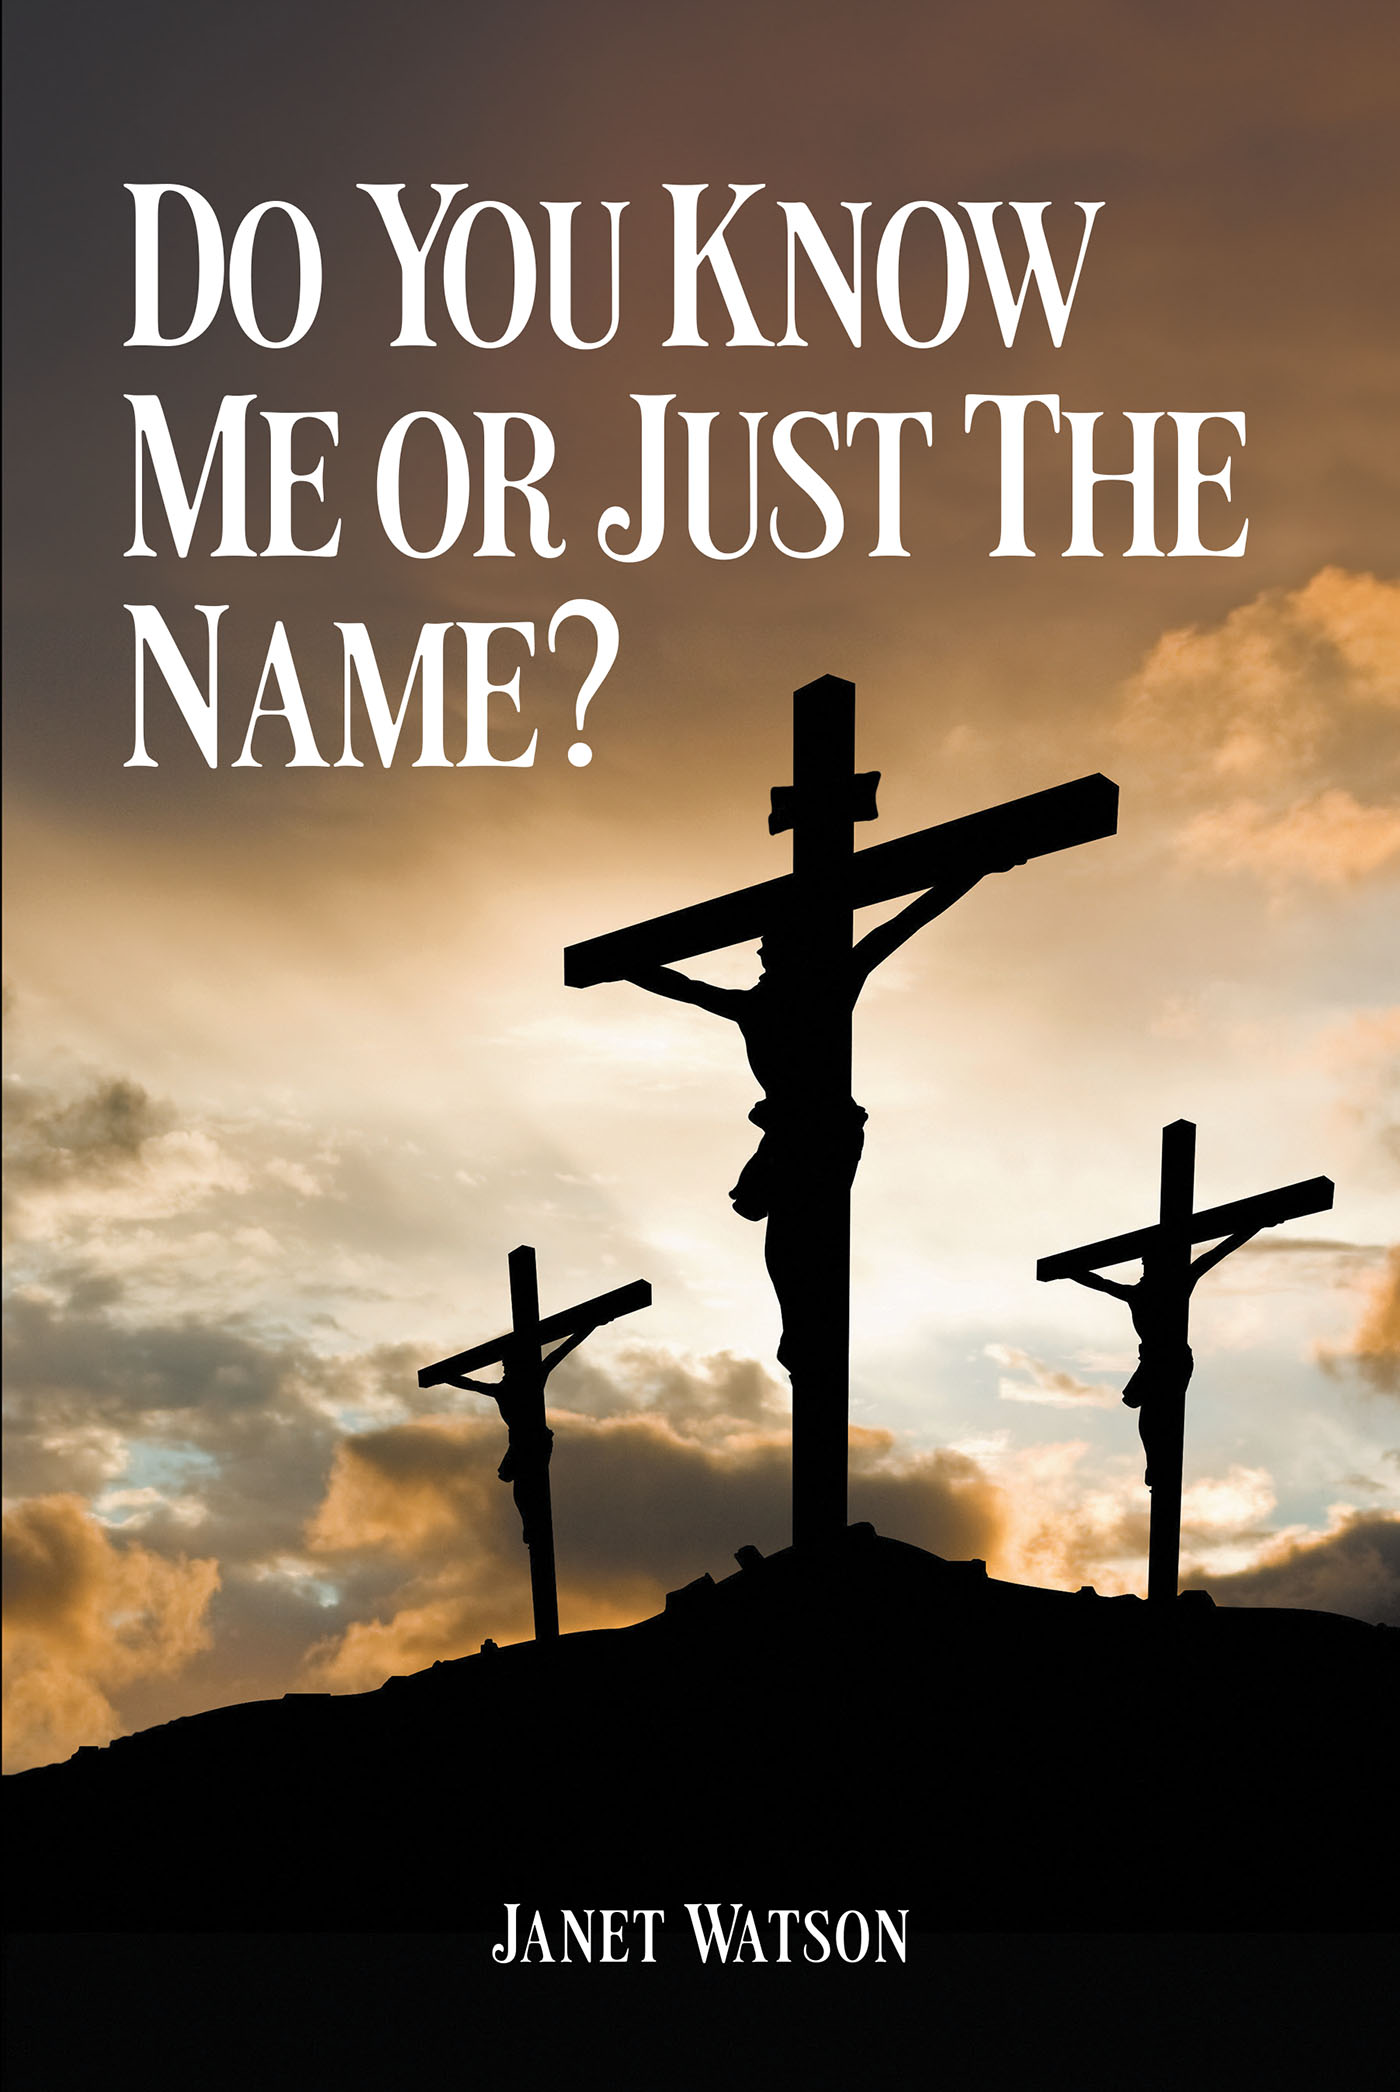 Janet Watson’s Newly Released "Do You Know Me or Just the Name?" is an Enlightening Exploration of Faith